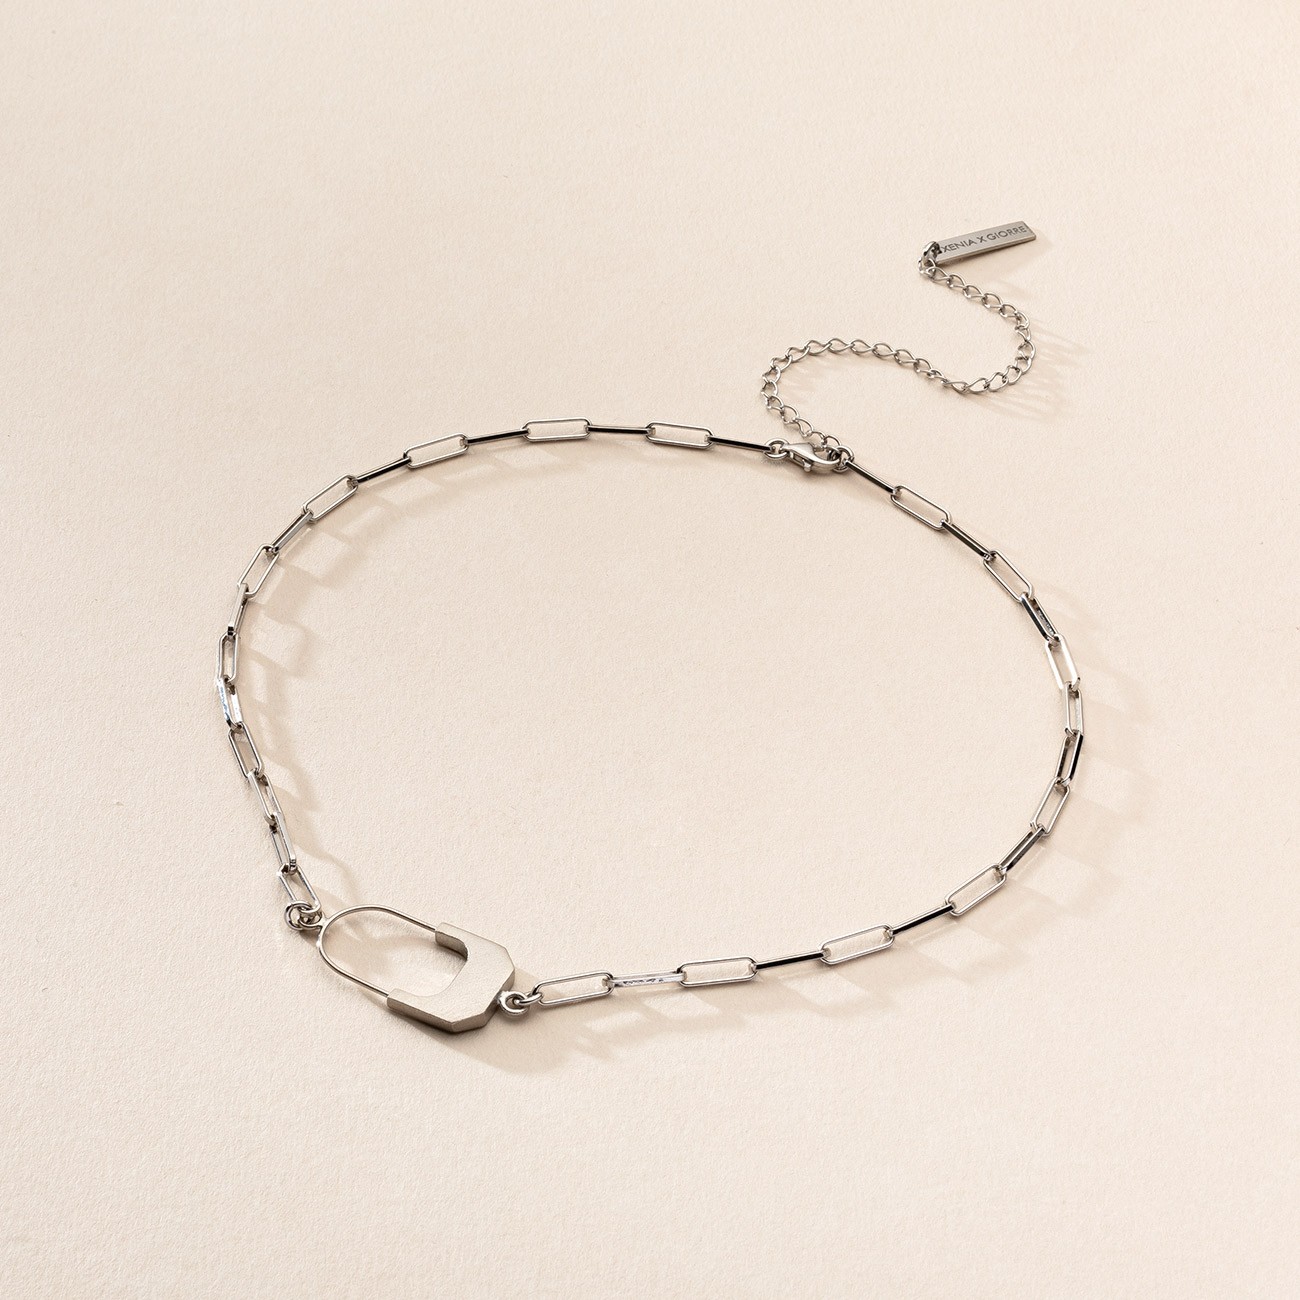 Choker with Giorre padlock, sterling silver 925